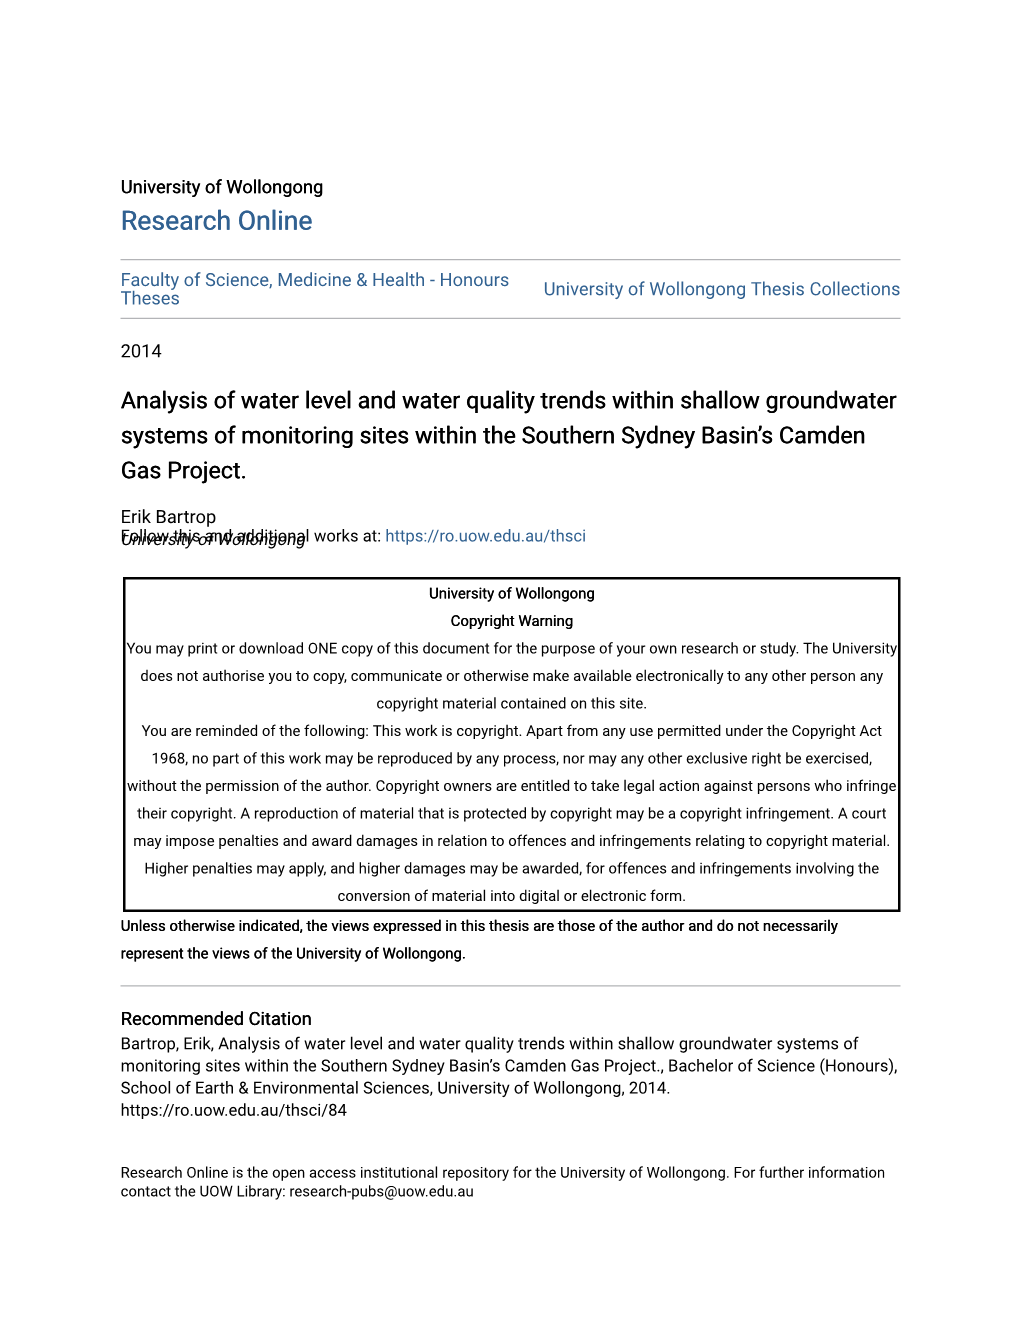 Analysis of Water Level and Water Quality Trends Within Shallow Groundwater Systems of Monitoring Sites Within the Southern Sydney Basin’S Camden Gas Project